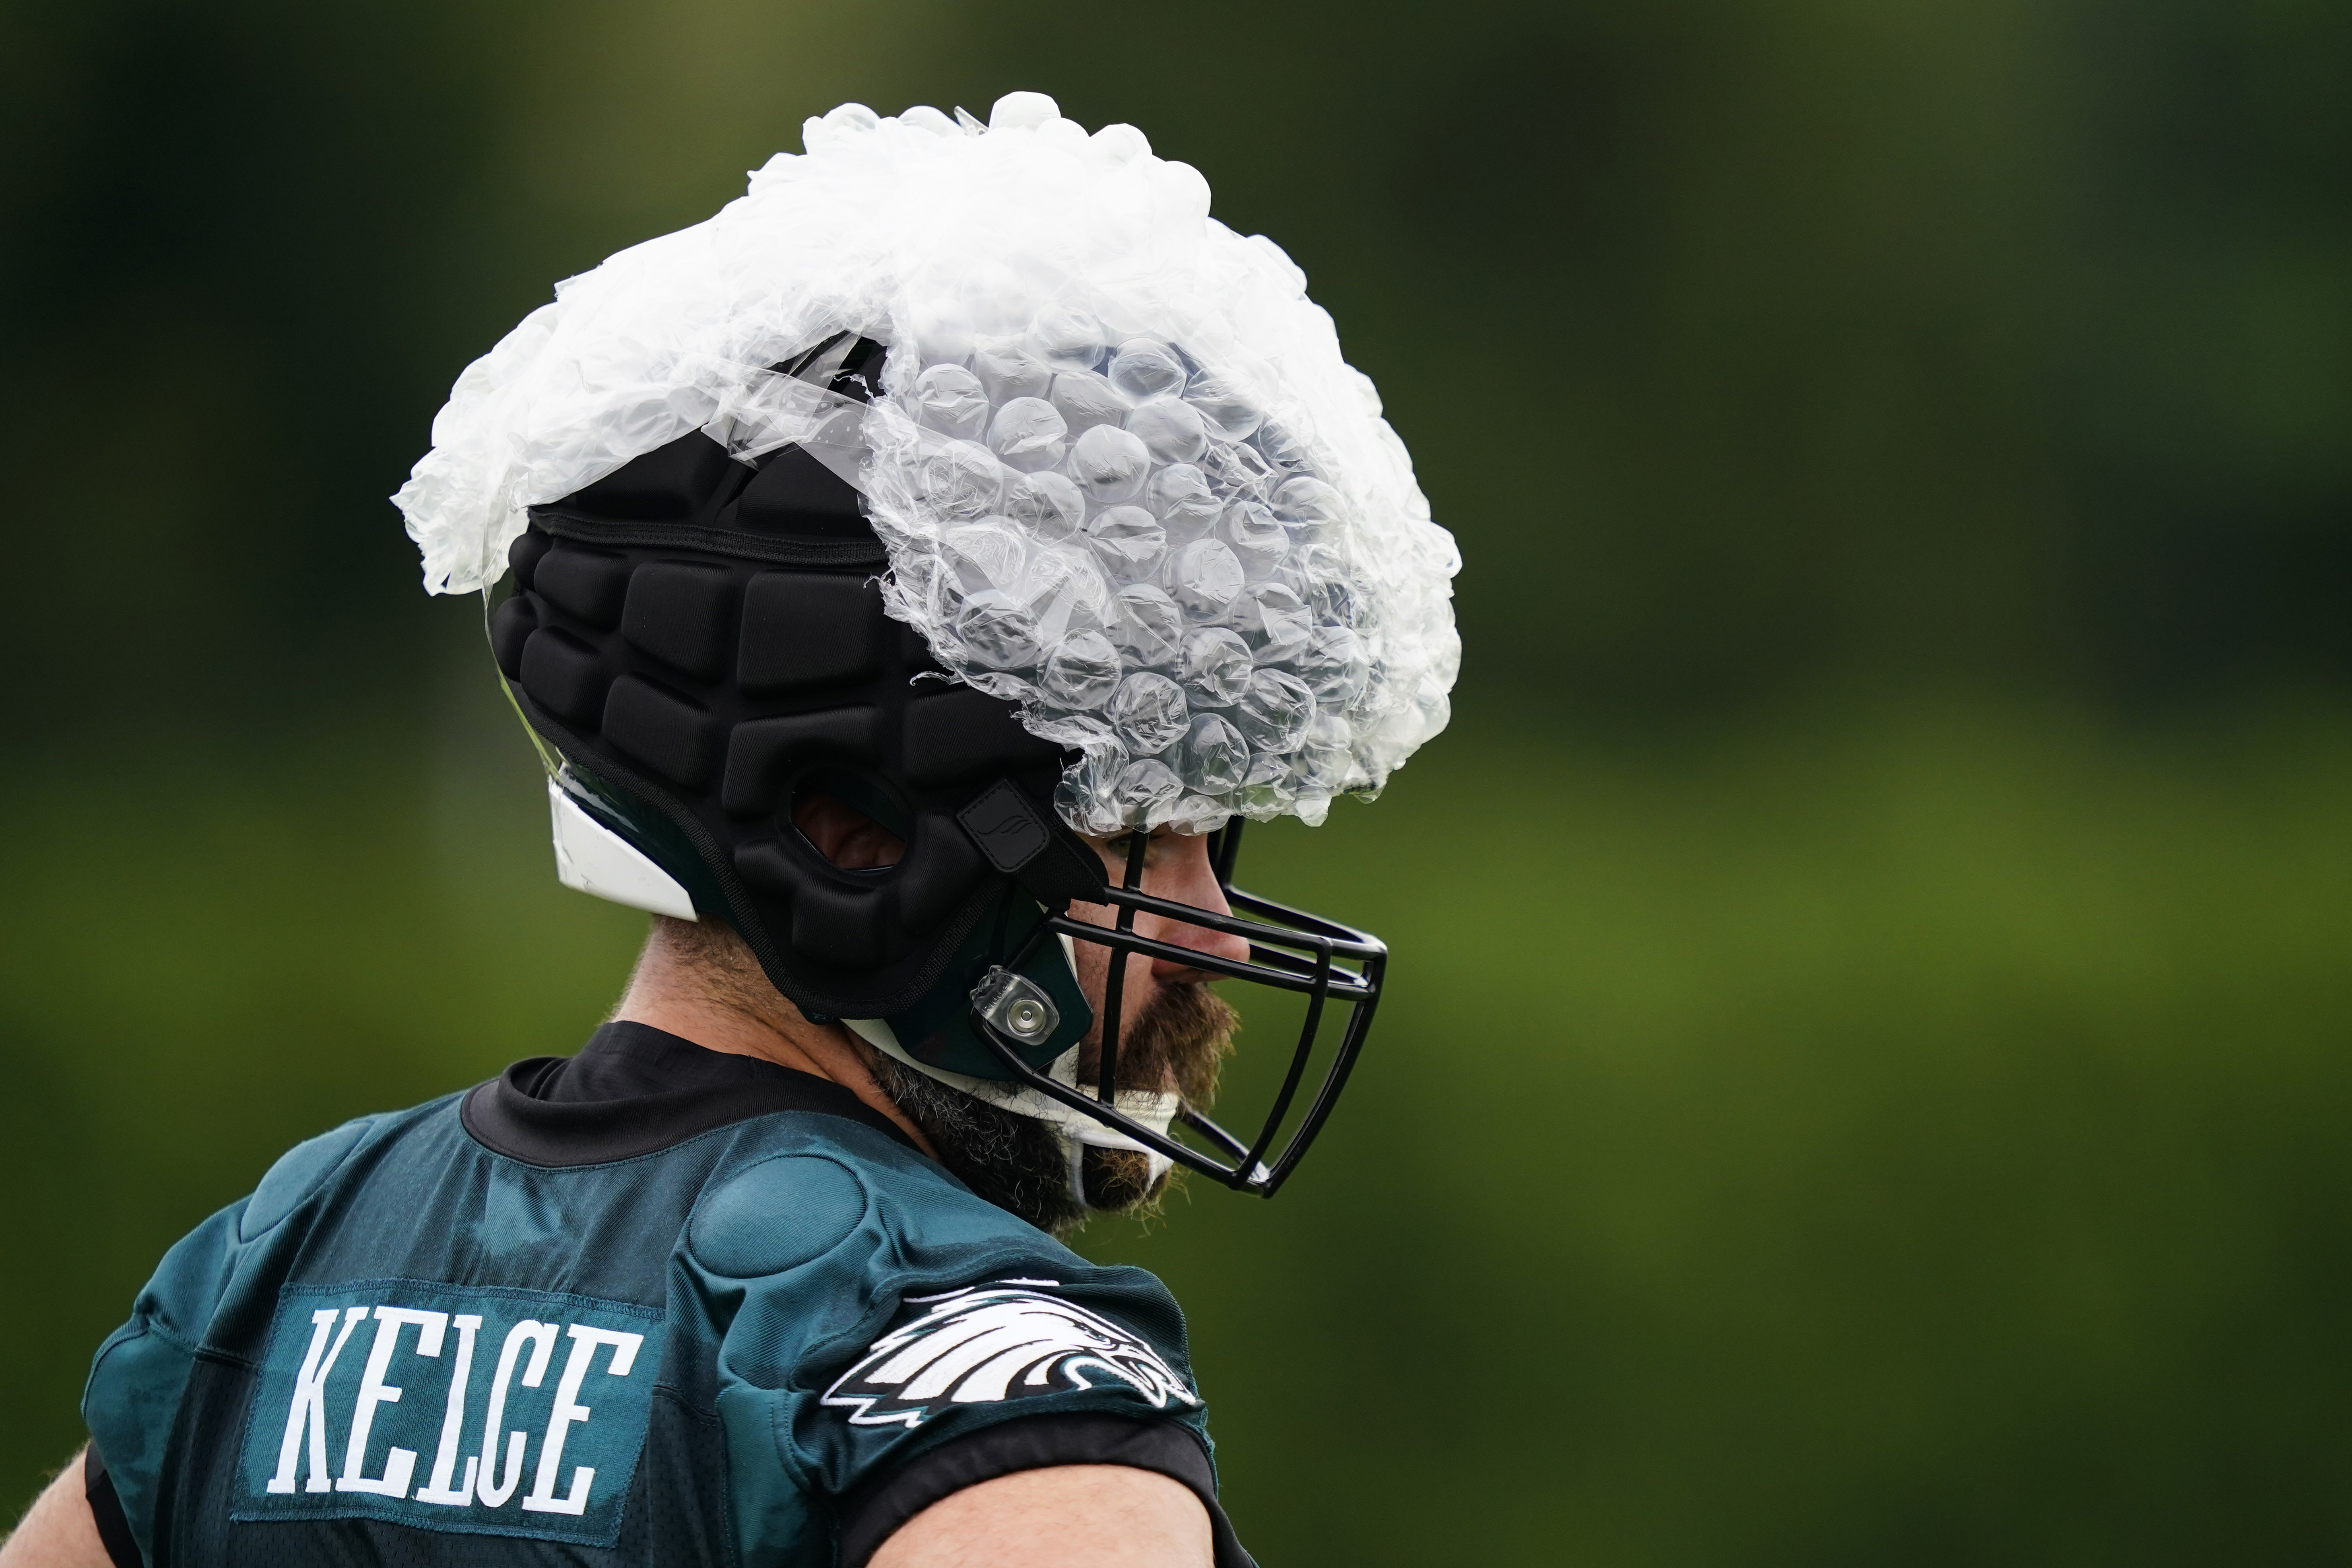 Puffy, spongy Guardian Caps could help curb NFL head injuries